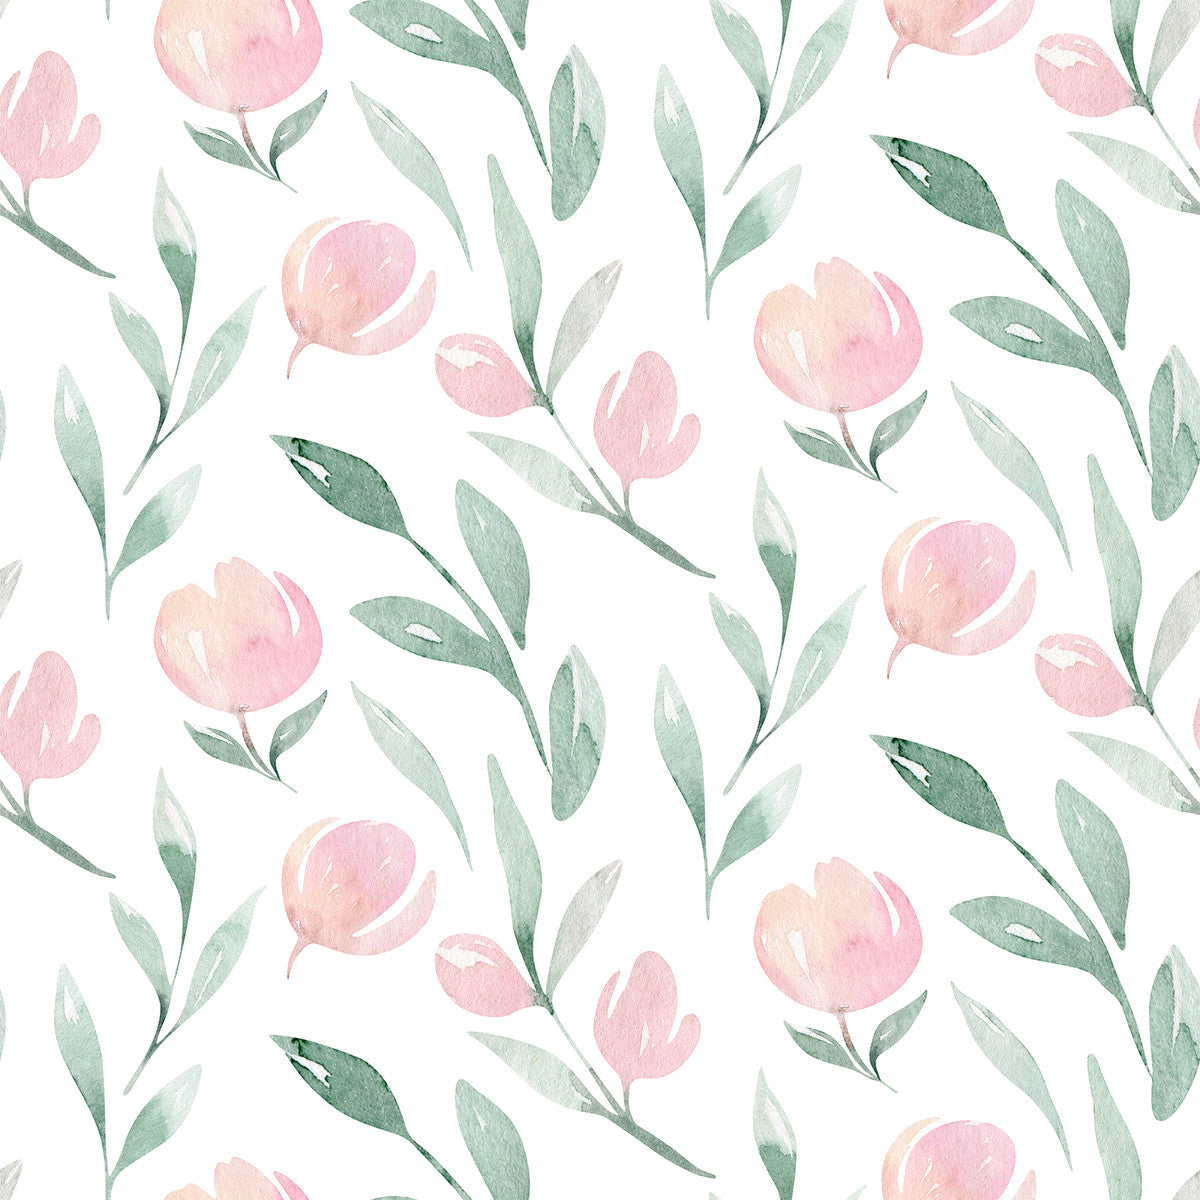 Contemporary Pink Flowers Wallpaper Chic